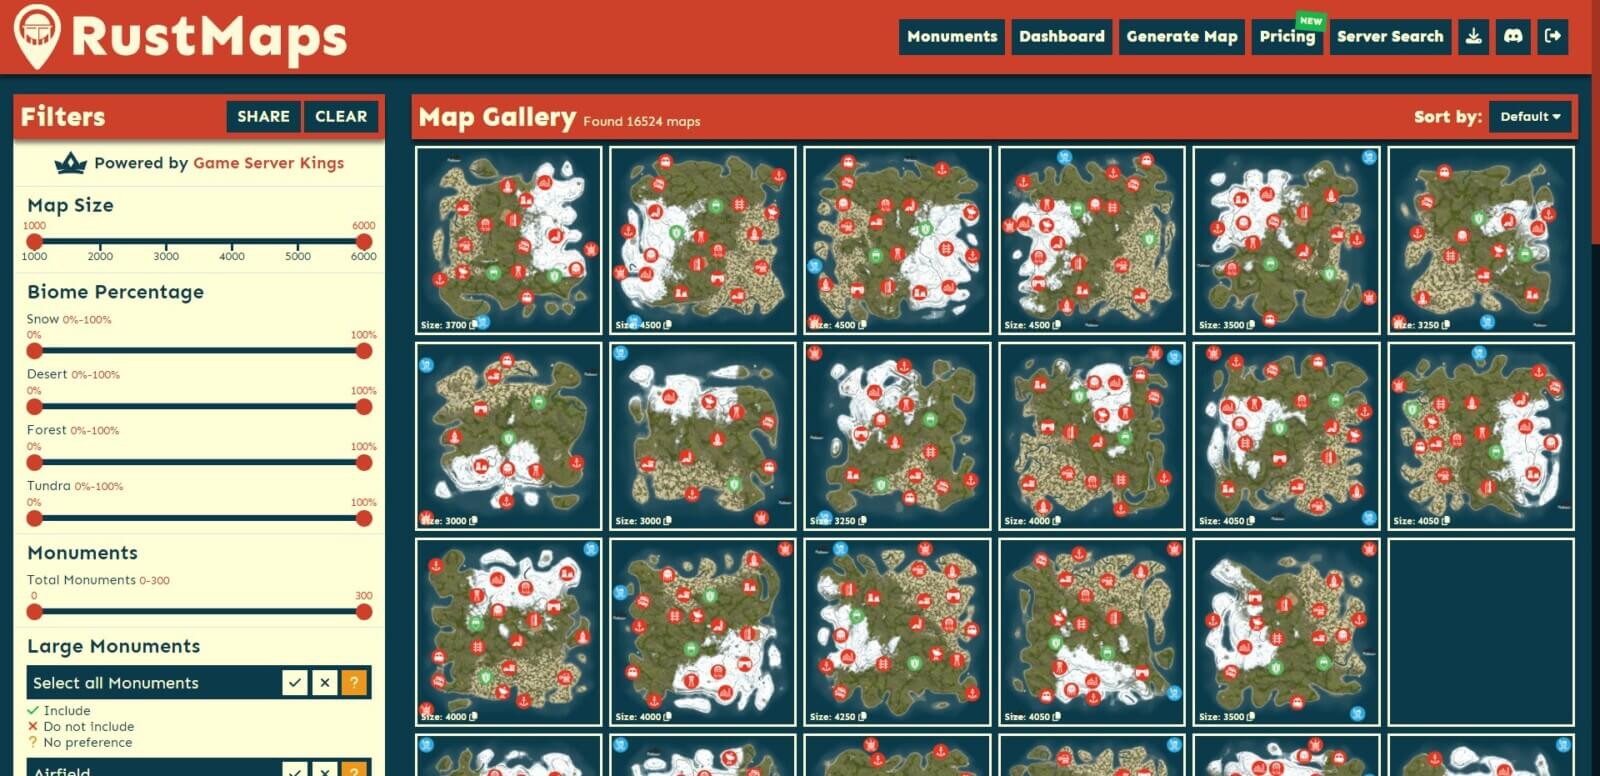 Overview screenshot of the home page of Rustmaps.com featuring their generated collection of procedural maps within their library.